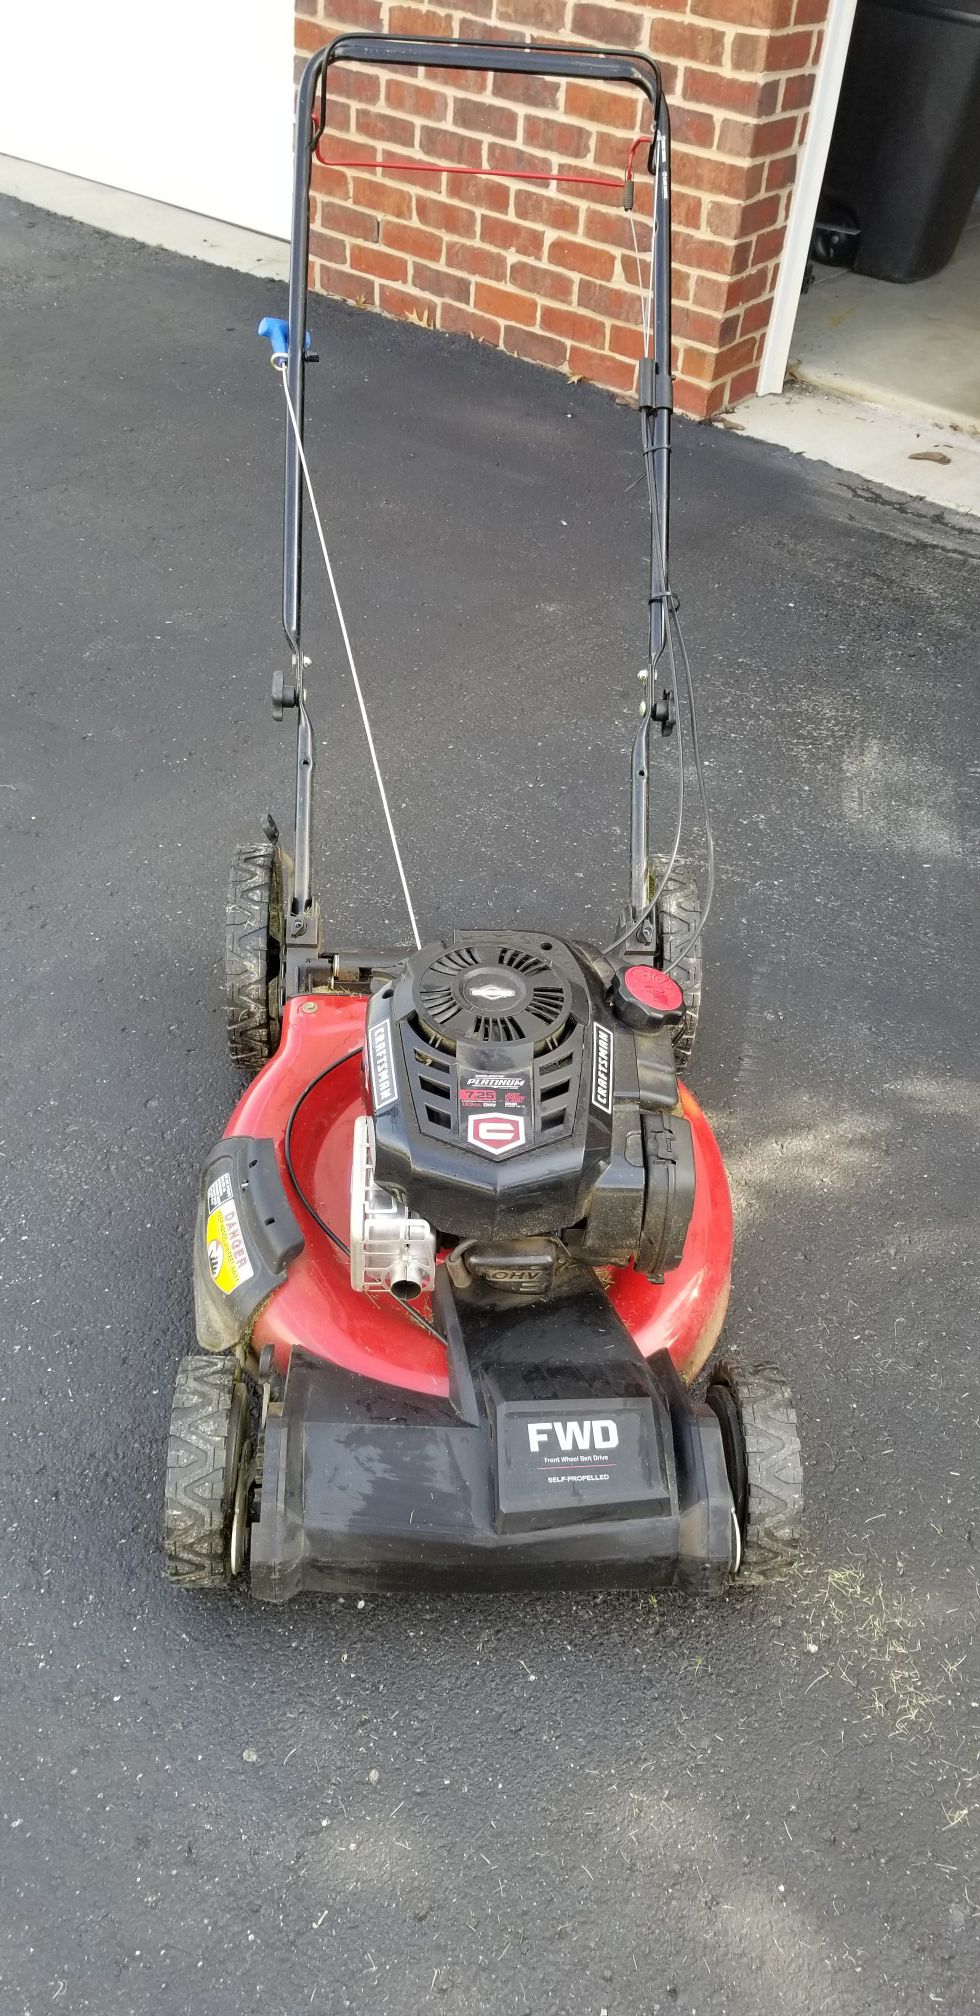 Craftsman FWD Self Propelled Lawn Mower - 1 year old